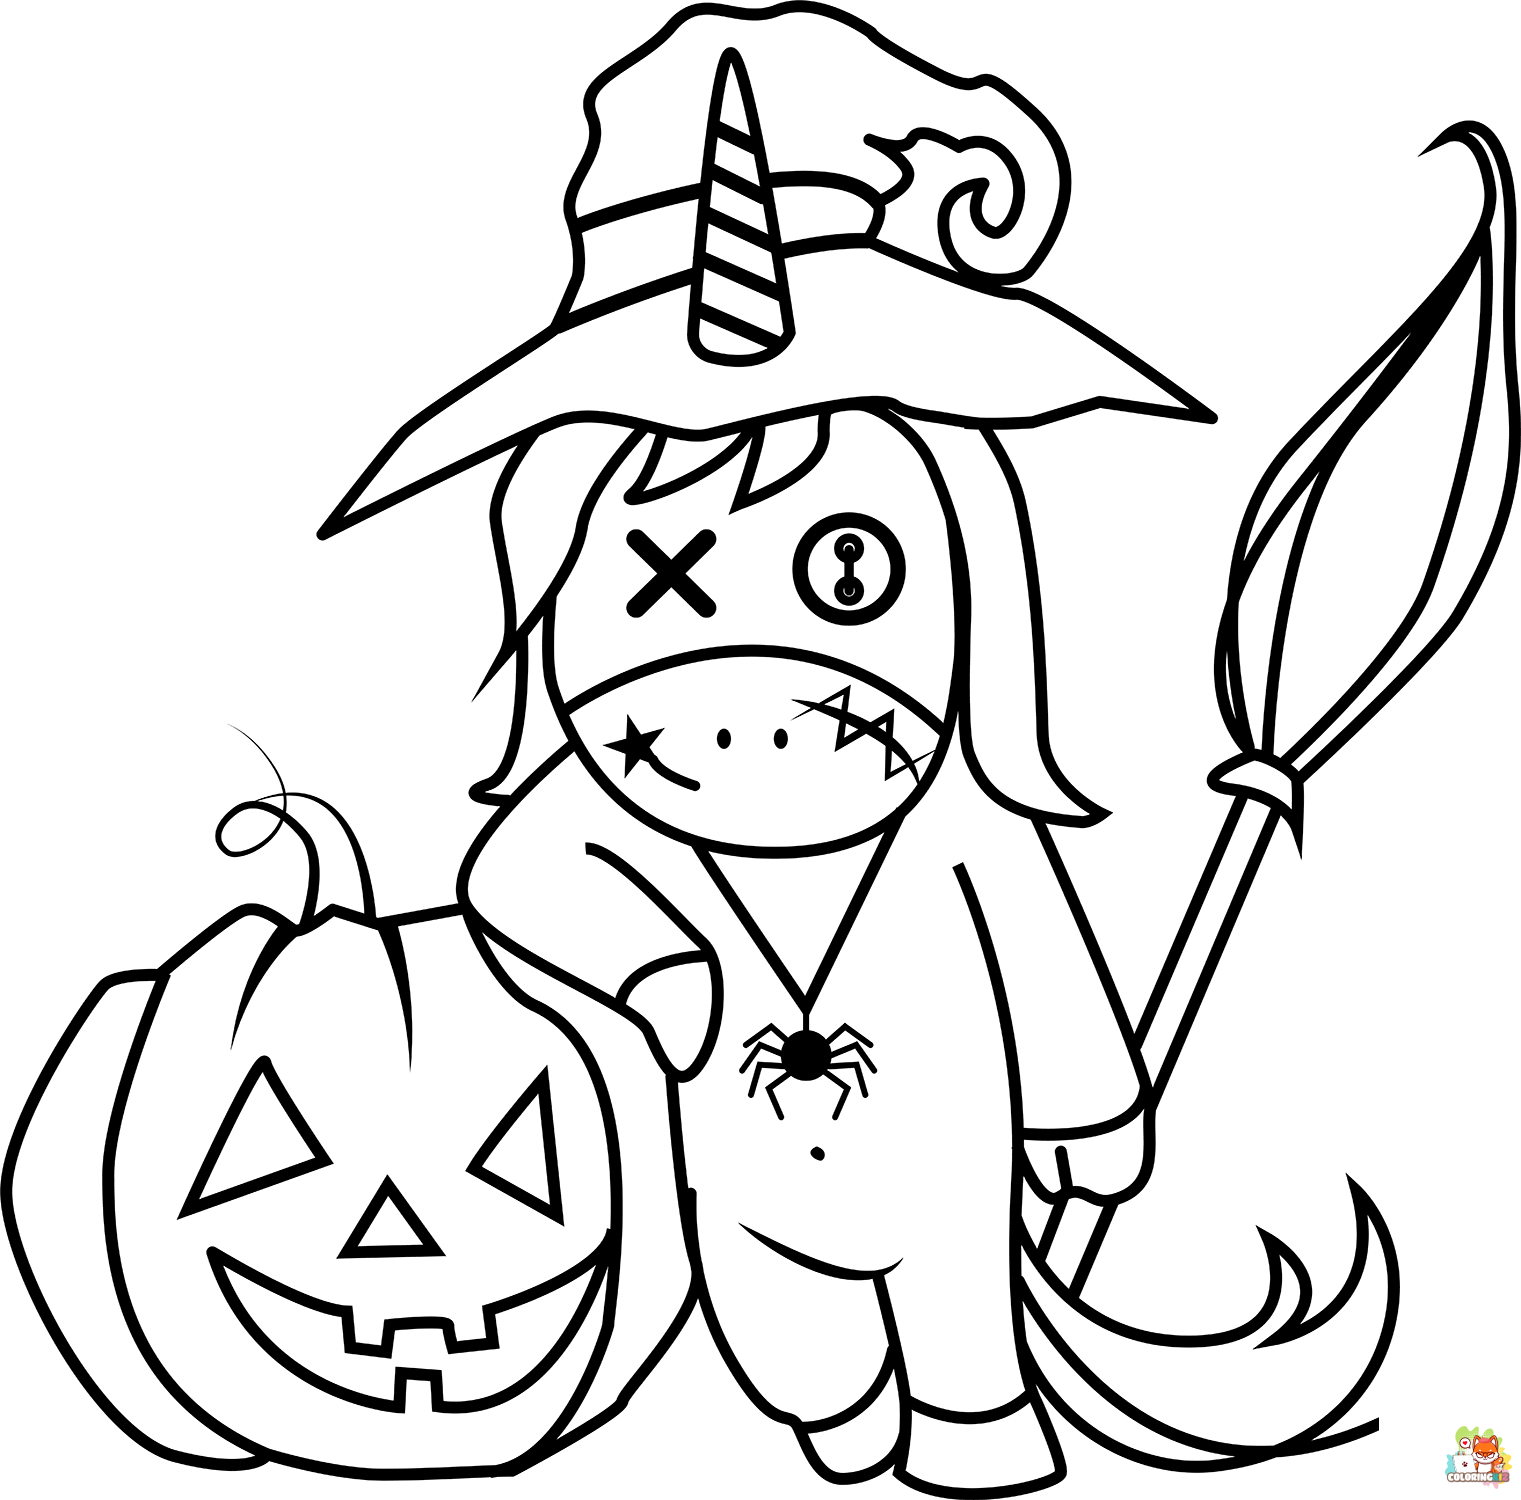 Unicorn and Witch coloring pages 1